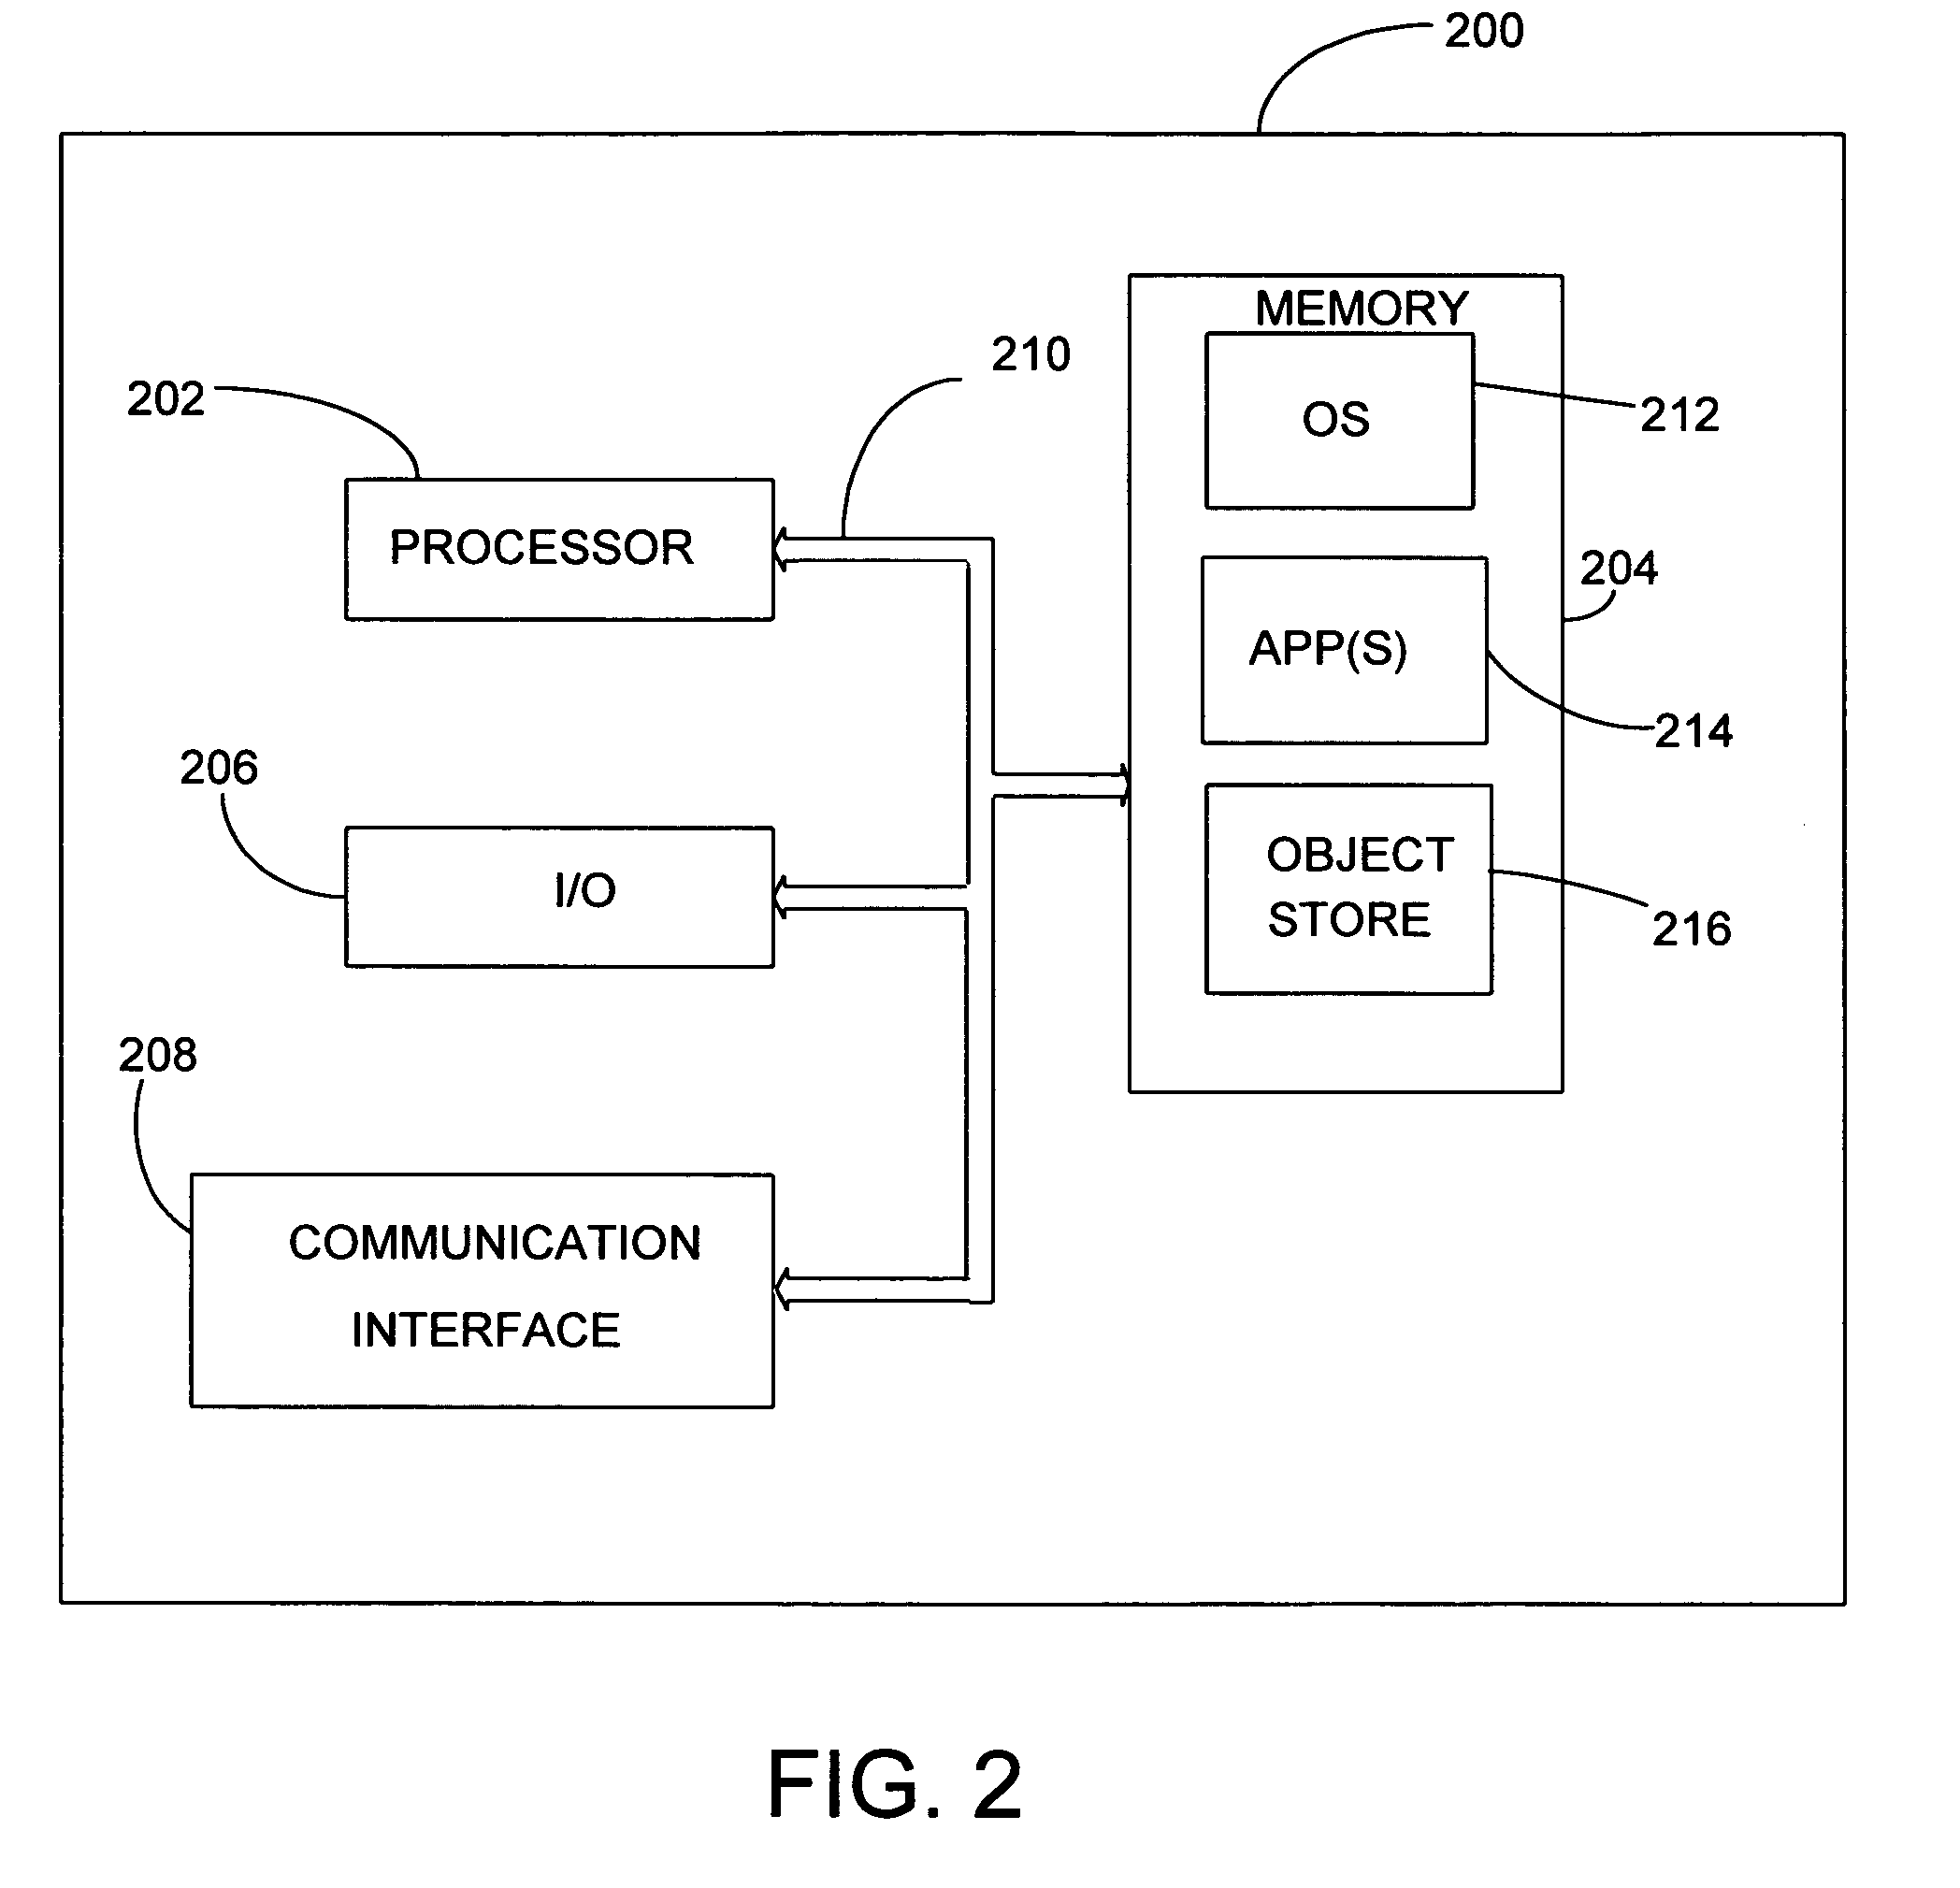 Method and system for obtaining personal aliases through voice recognition